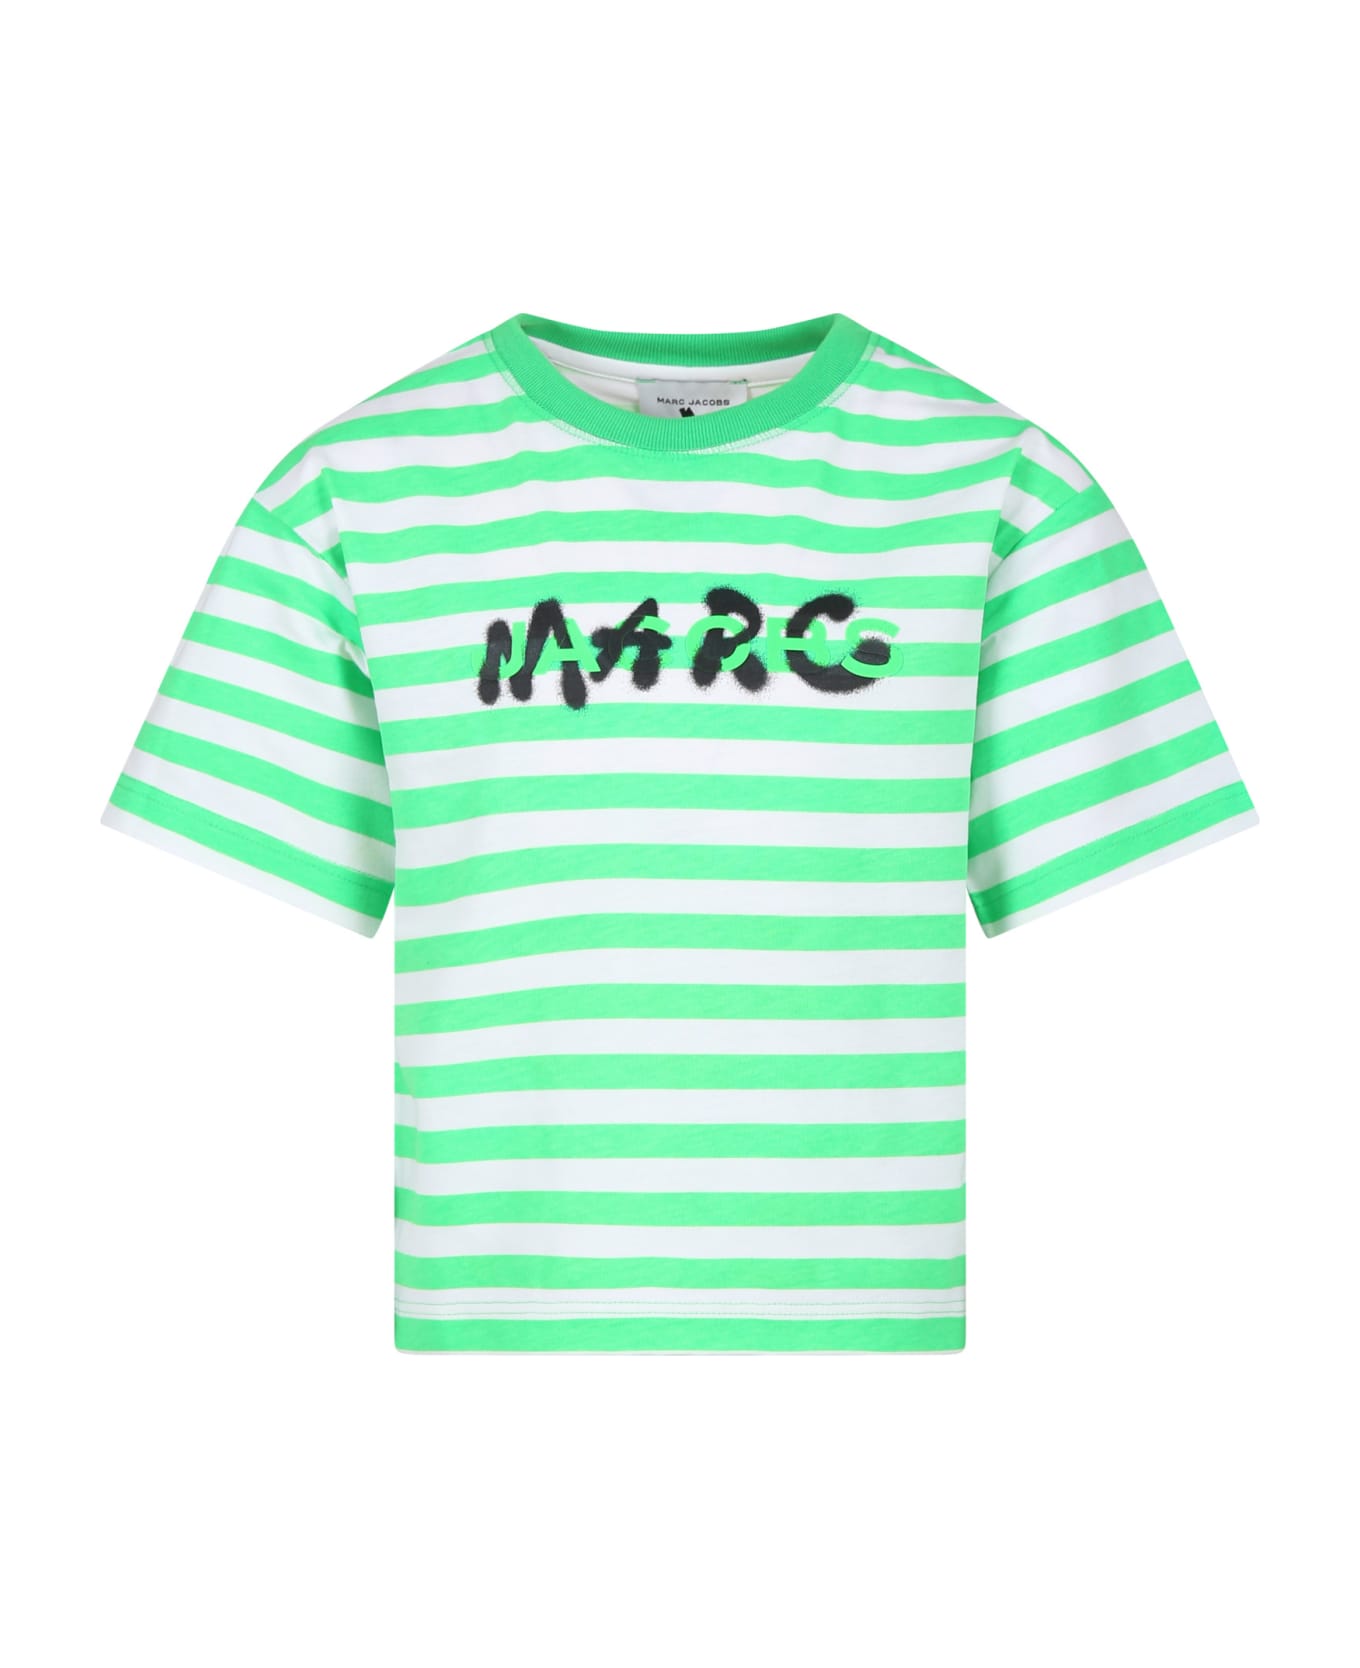 Marc Jacobs Green T-shirt For Kids With Logo - Green Tシャツ＆ポロシャツ